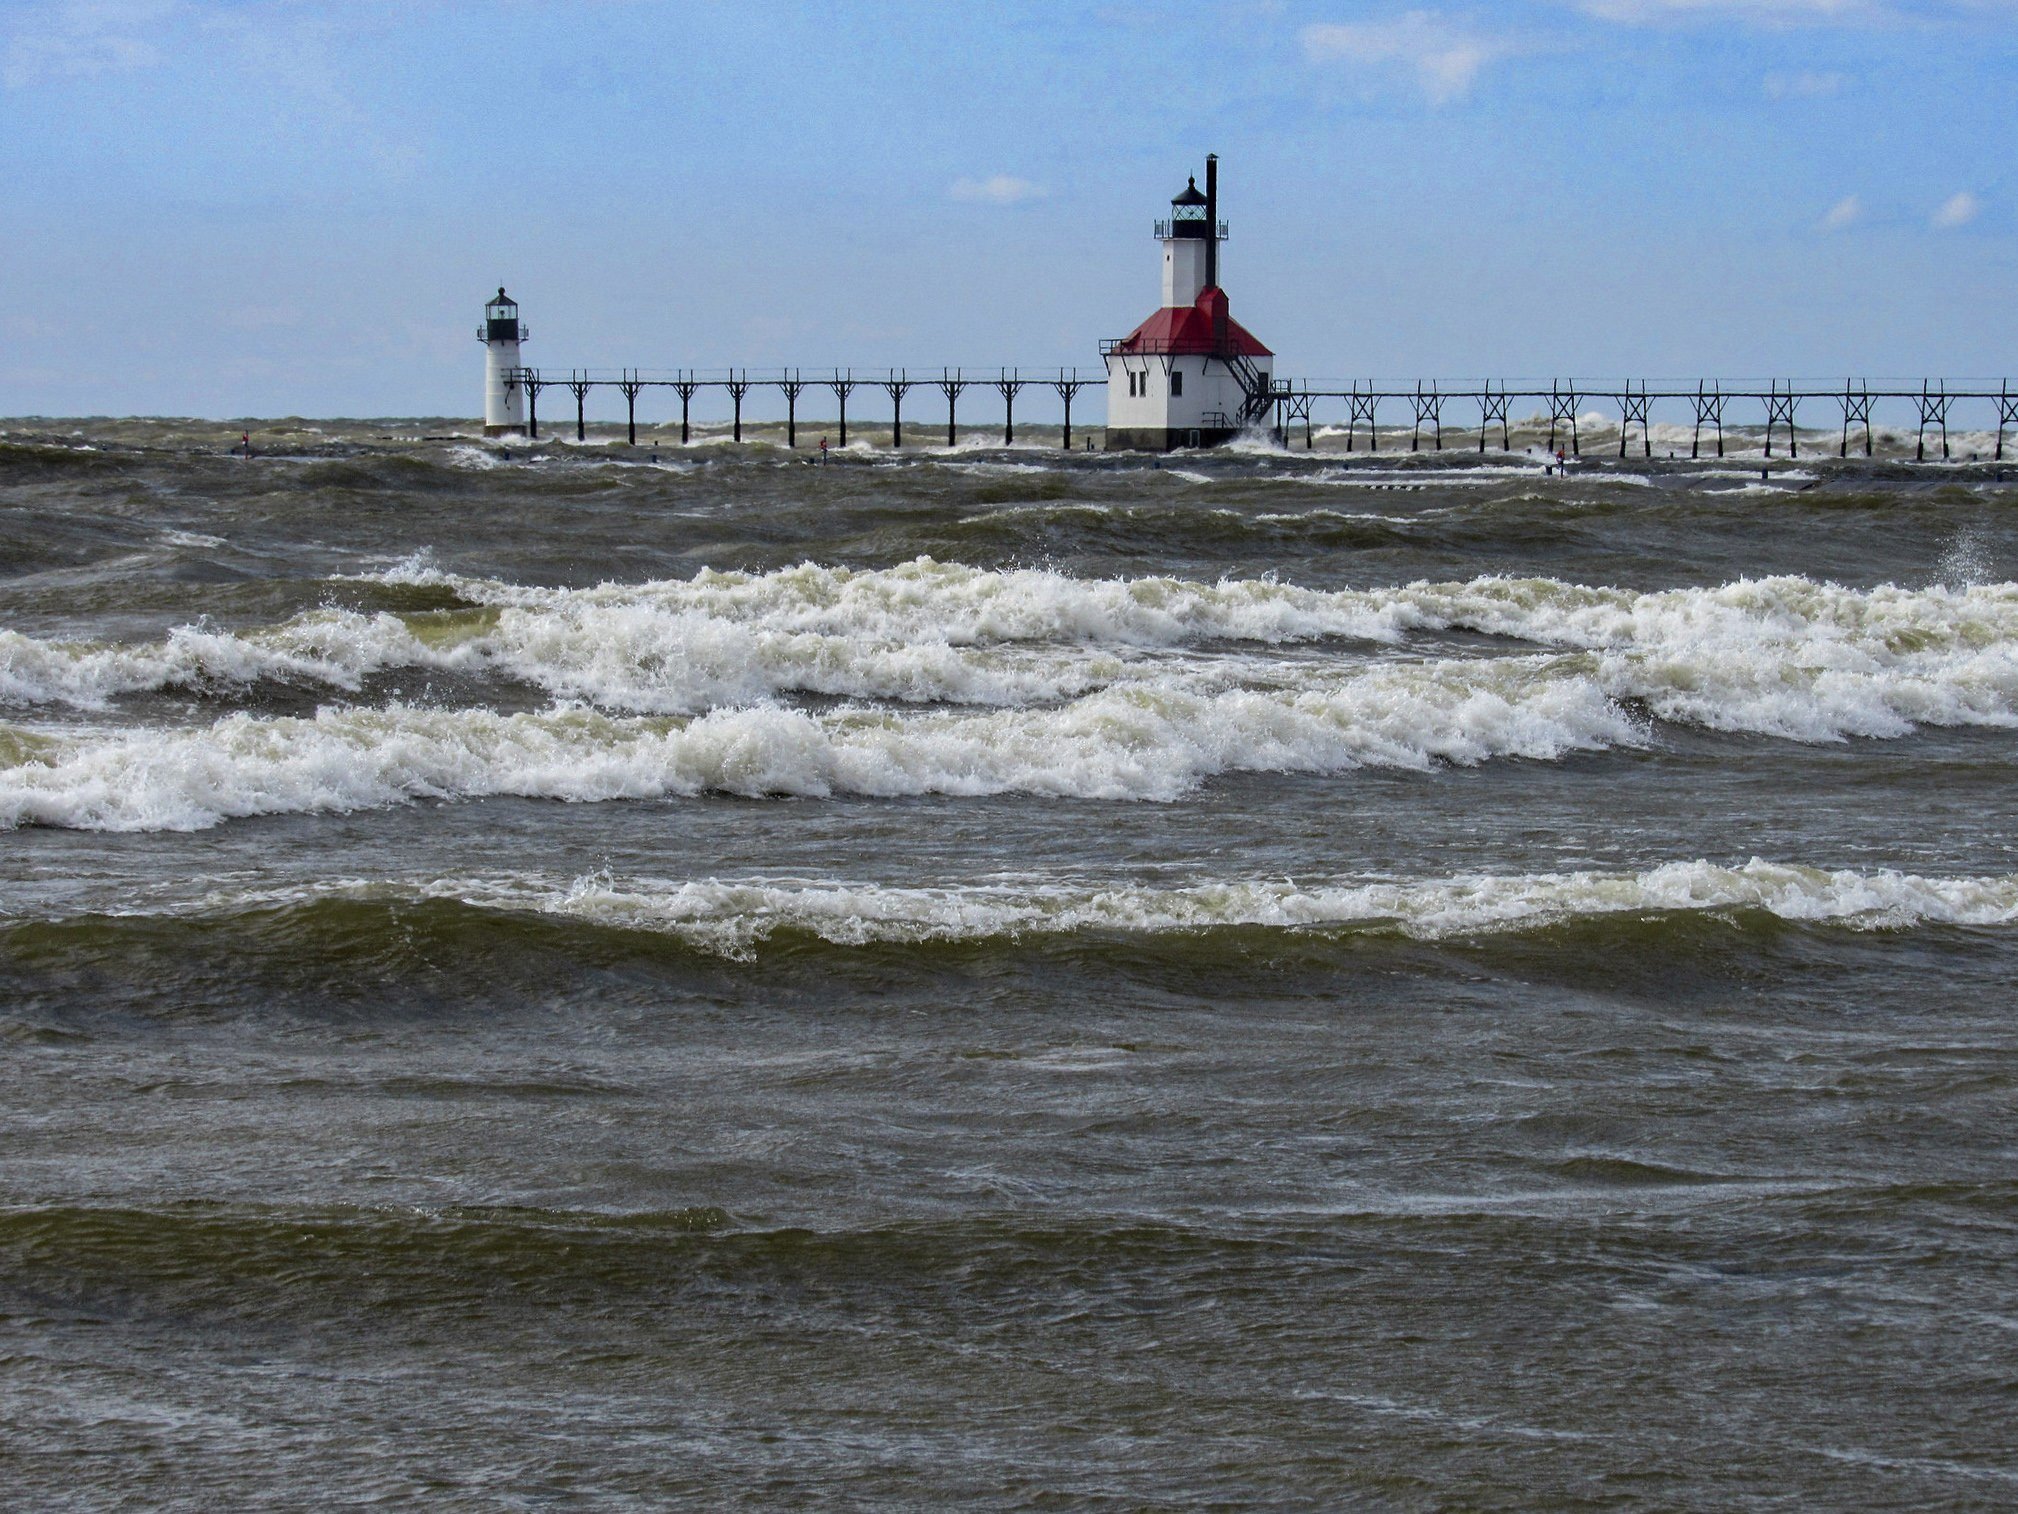 High water impacts continue across Michigan - Manistee News Advocate